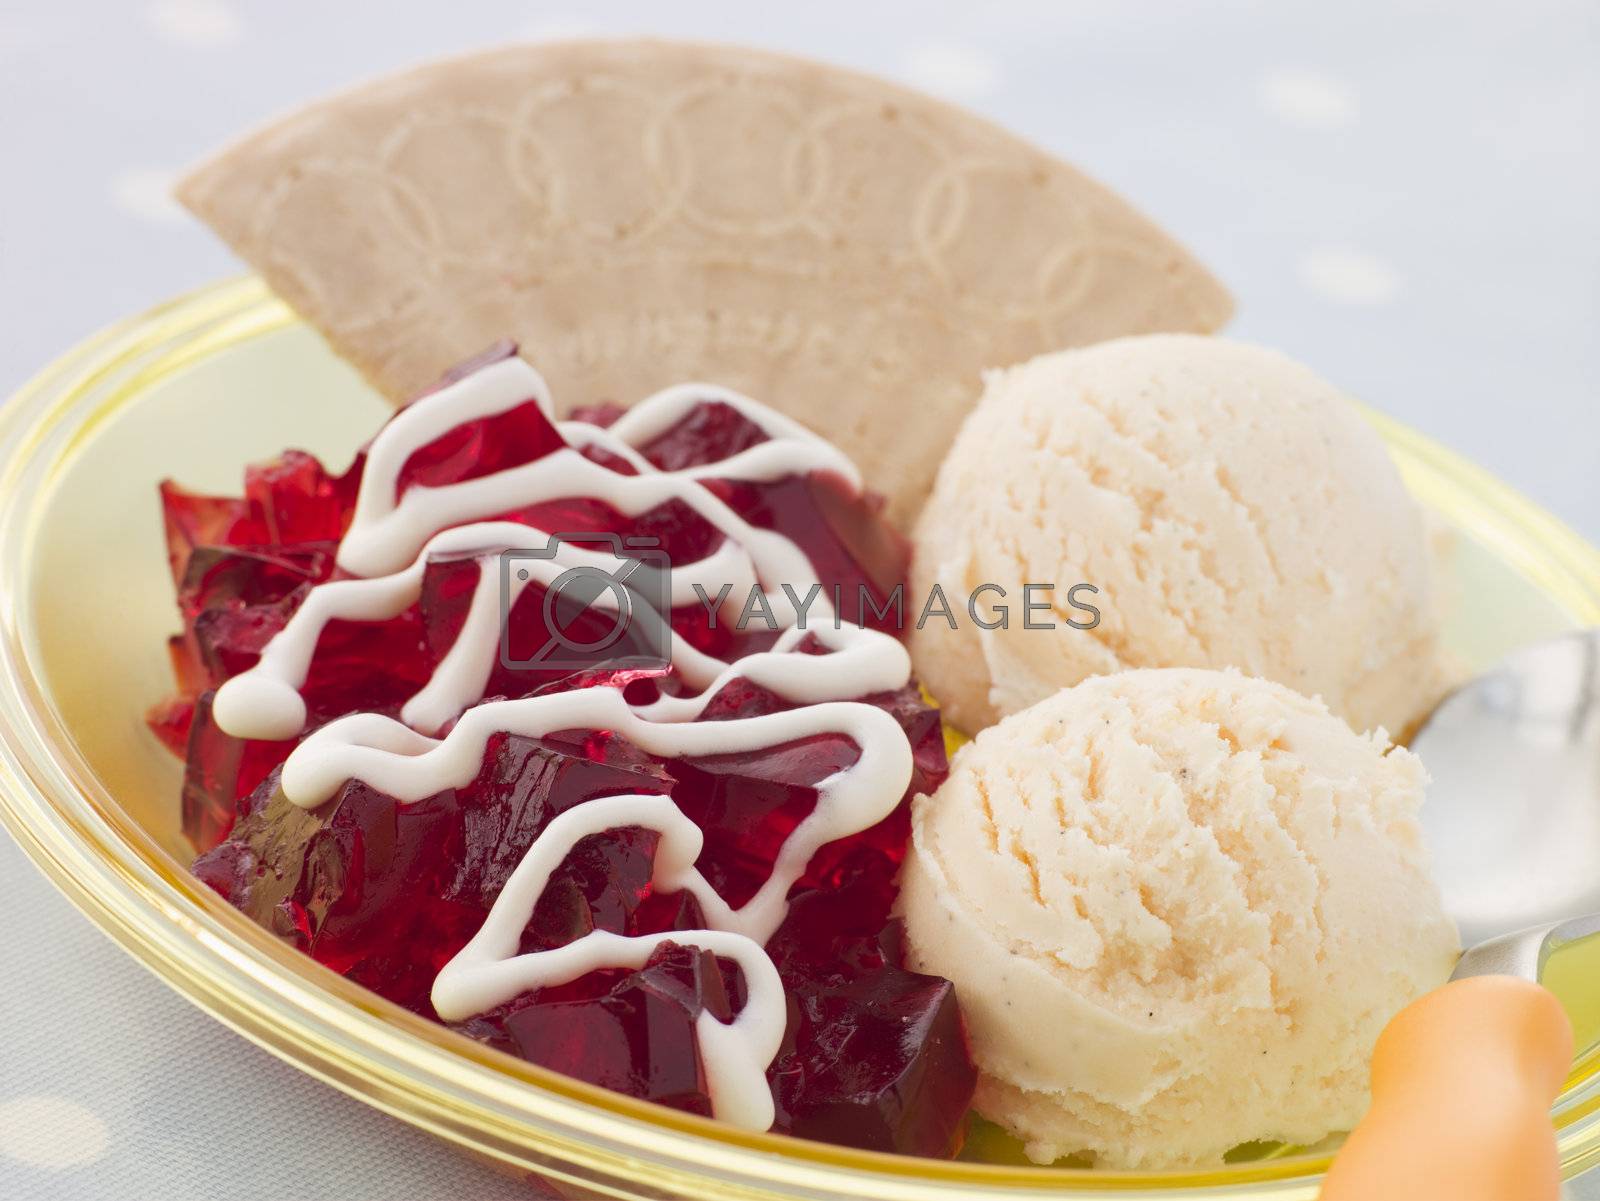 Royalty free image of Jelly and Ice Cream with a Wafer and Cream by MonkeyBusiness